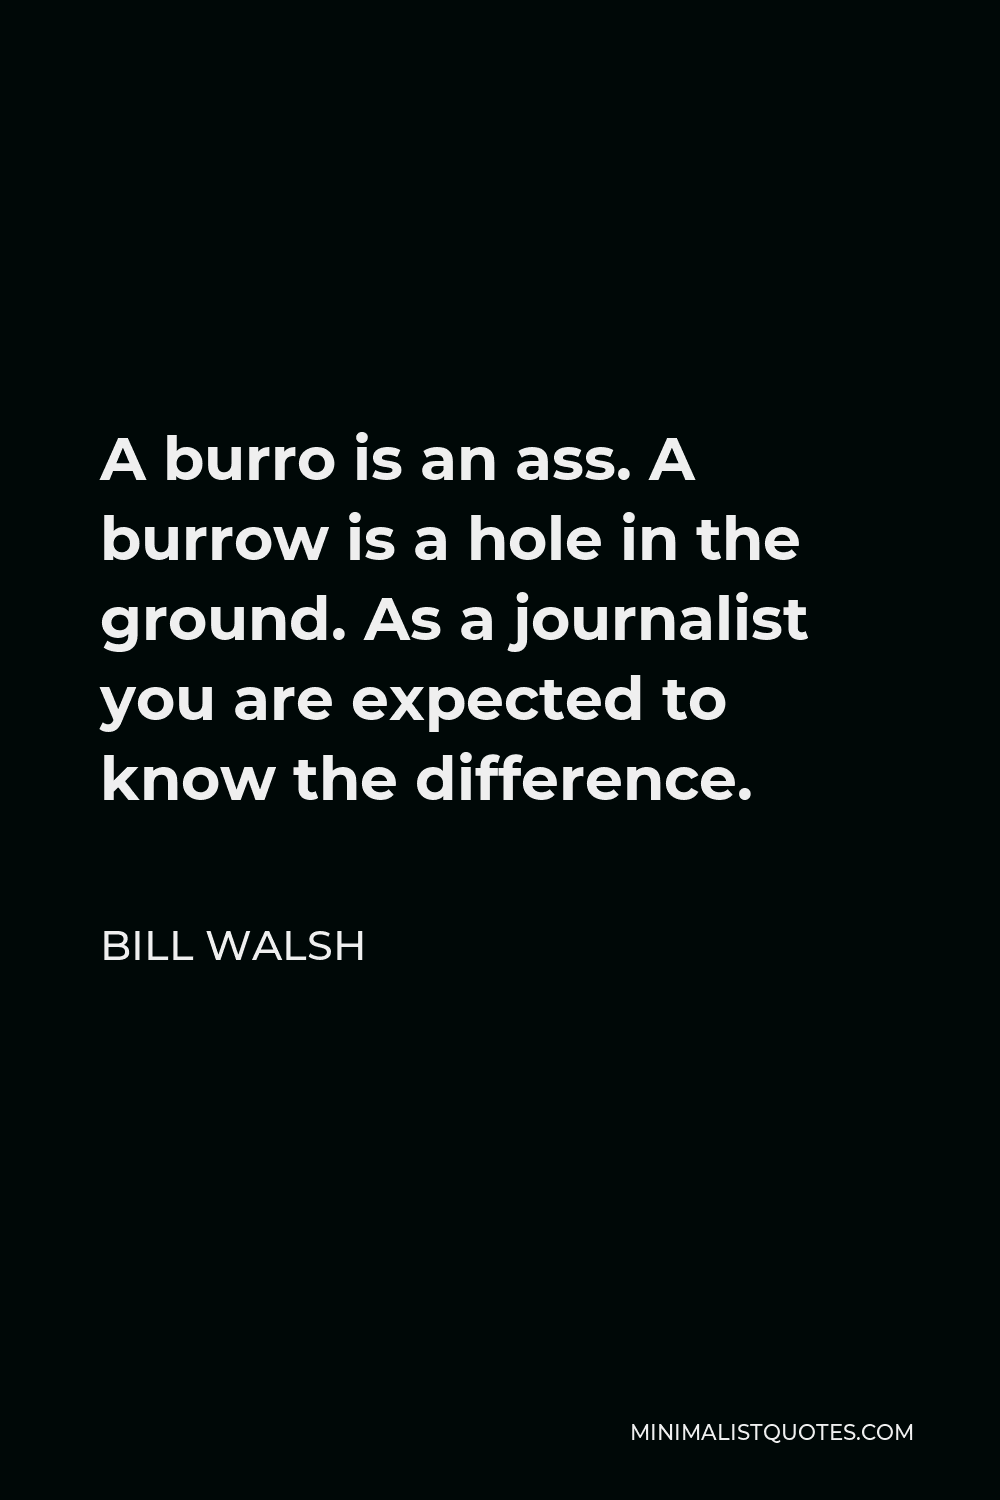 Bill Walsh Quote - A burro is an ass. A burrow is a hole in the ground. As a journalist you are expected to know the difference.